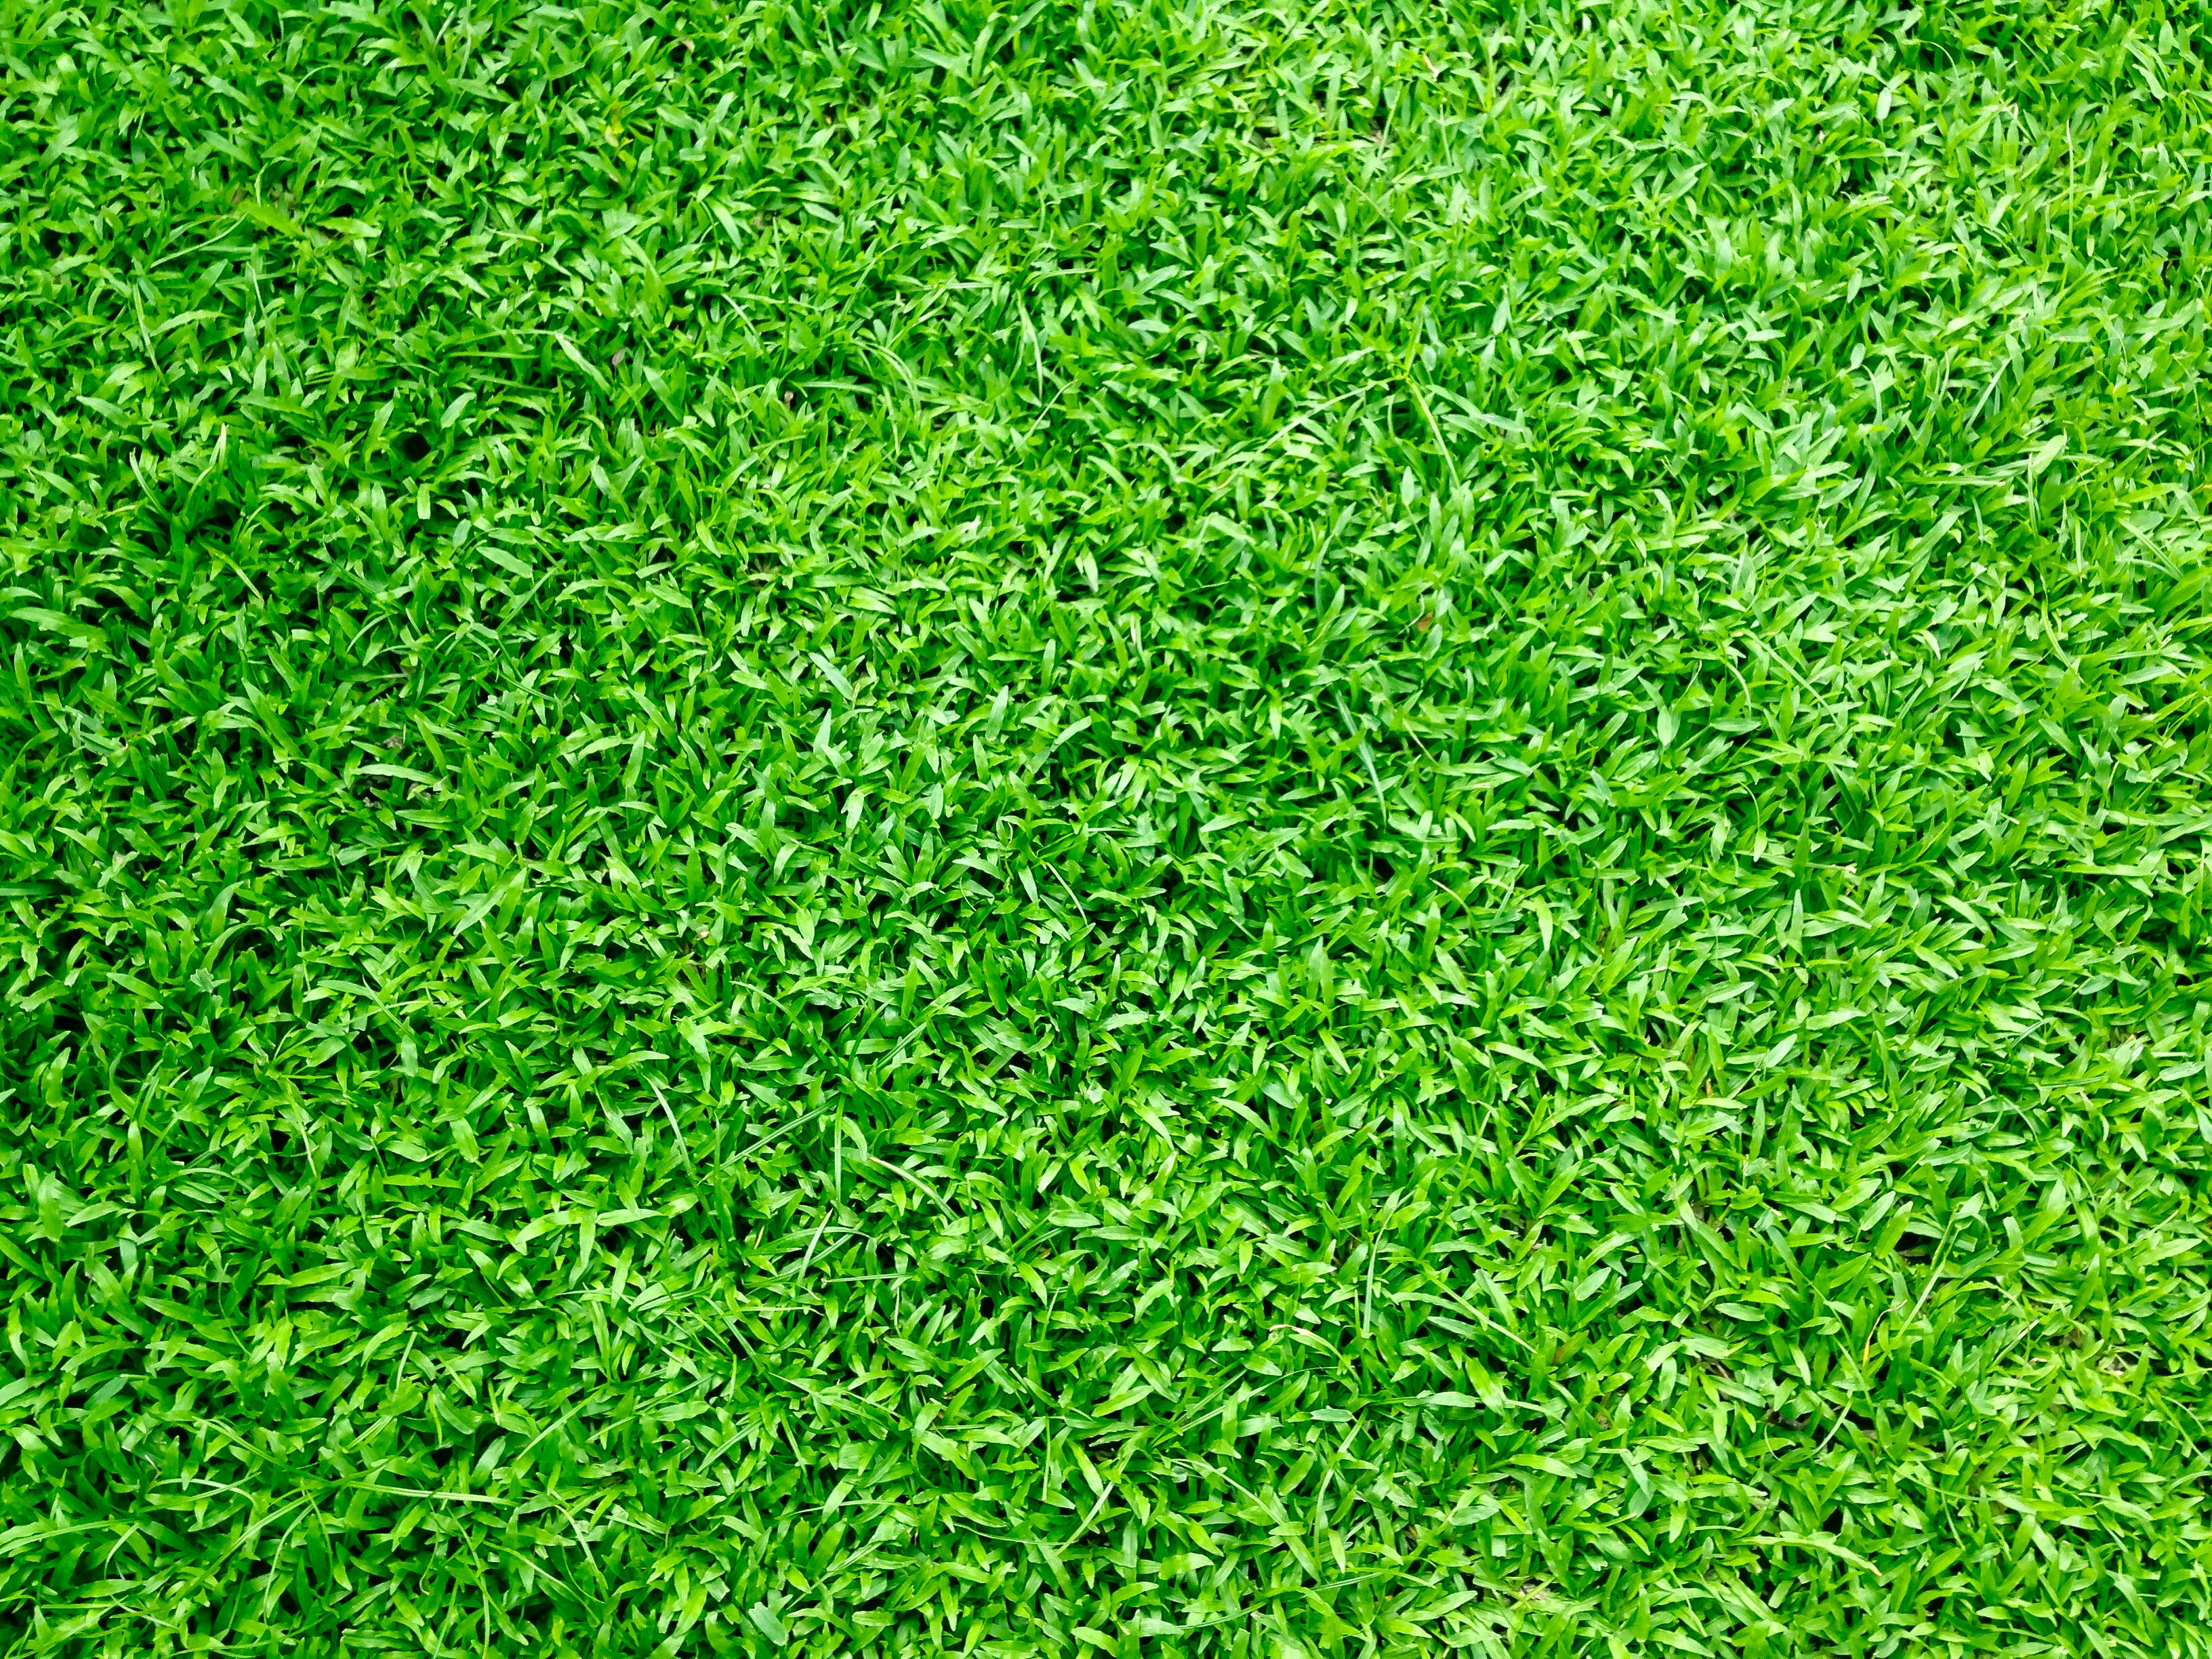 Overhead view of bright green turf.